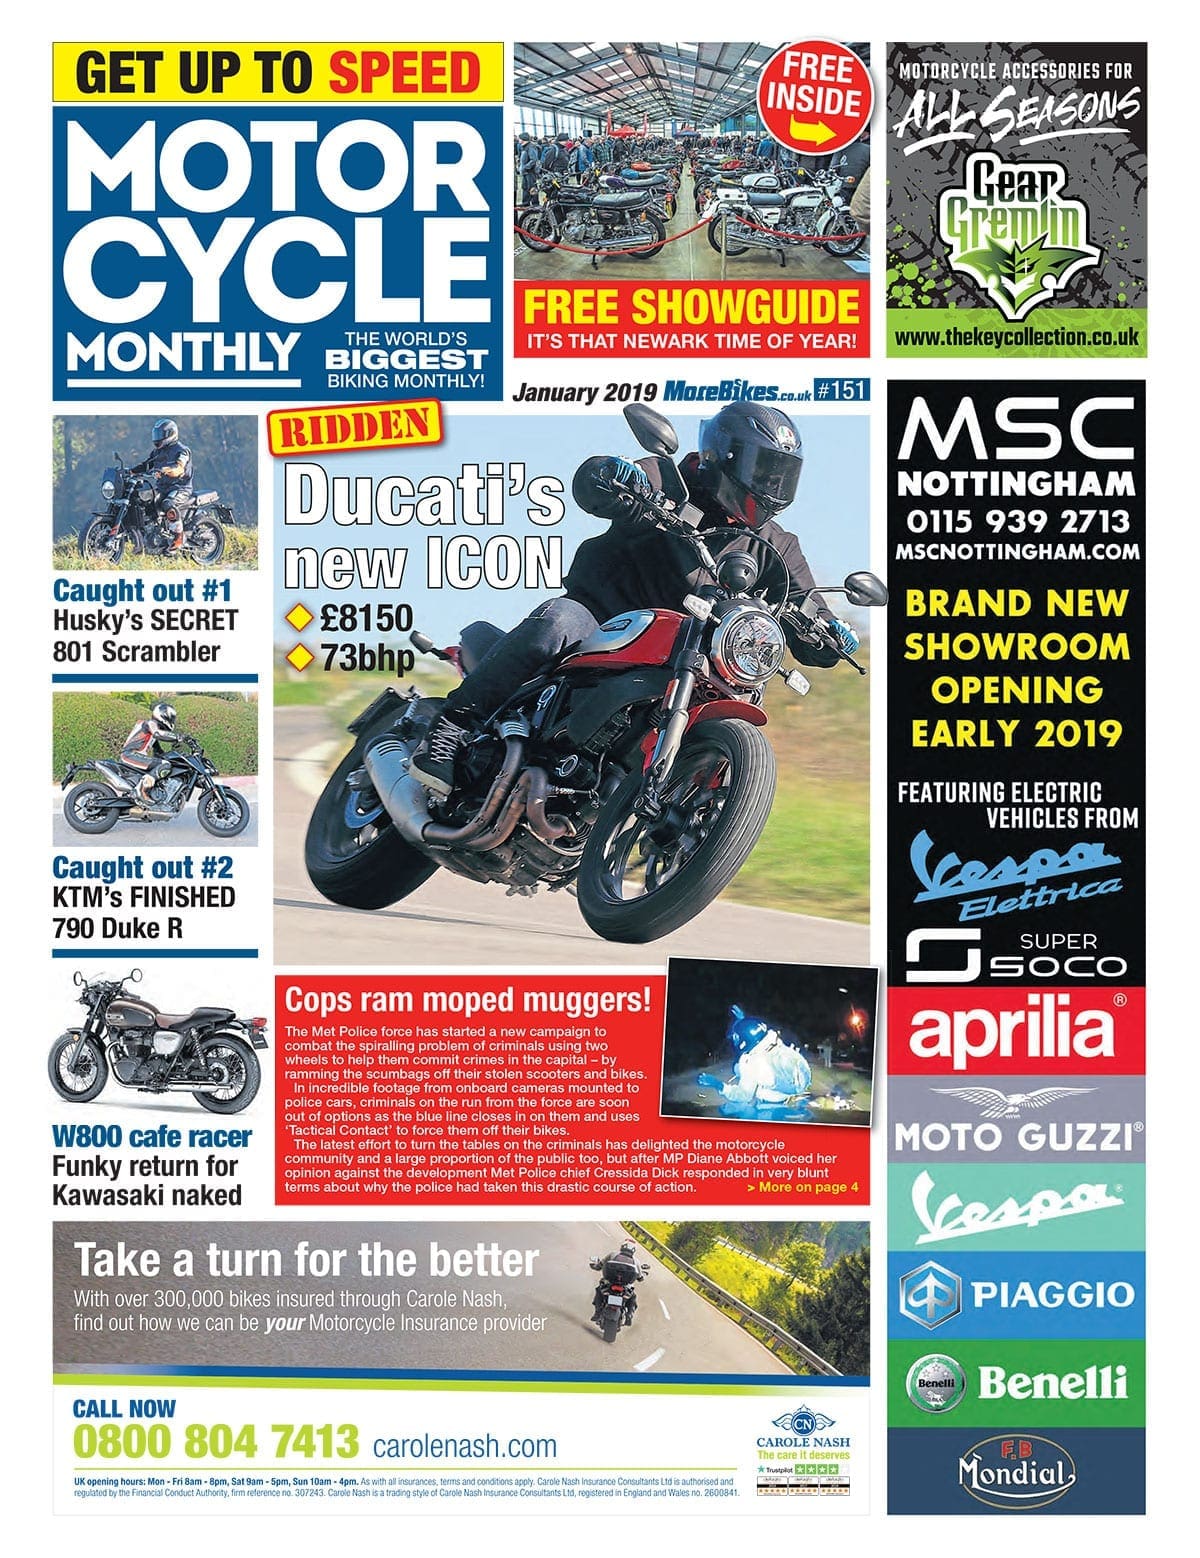 Motor Cycle MonthlyJANUARY 2019 – #151 – Out Now and it’s COMPLETELY FREE!